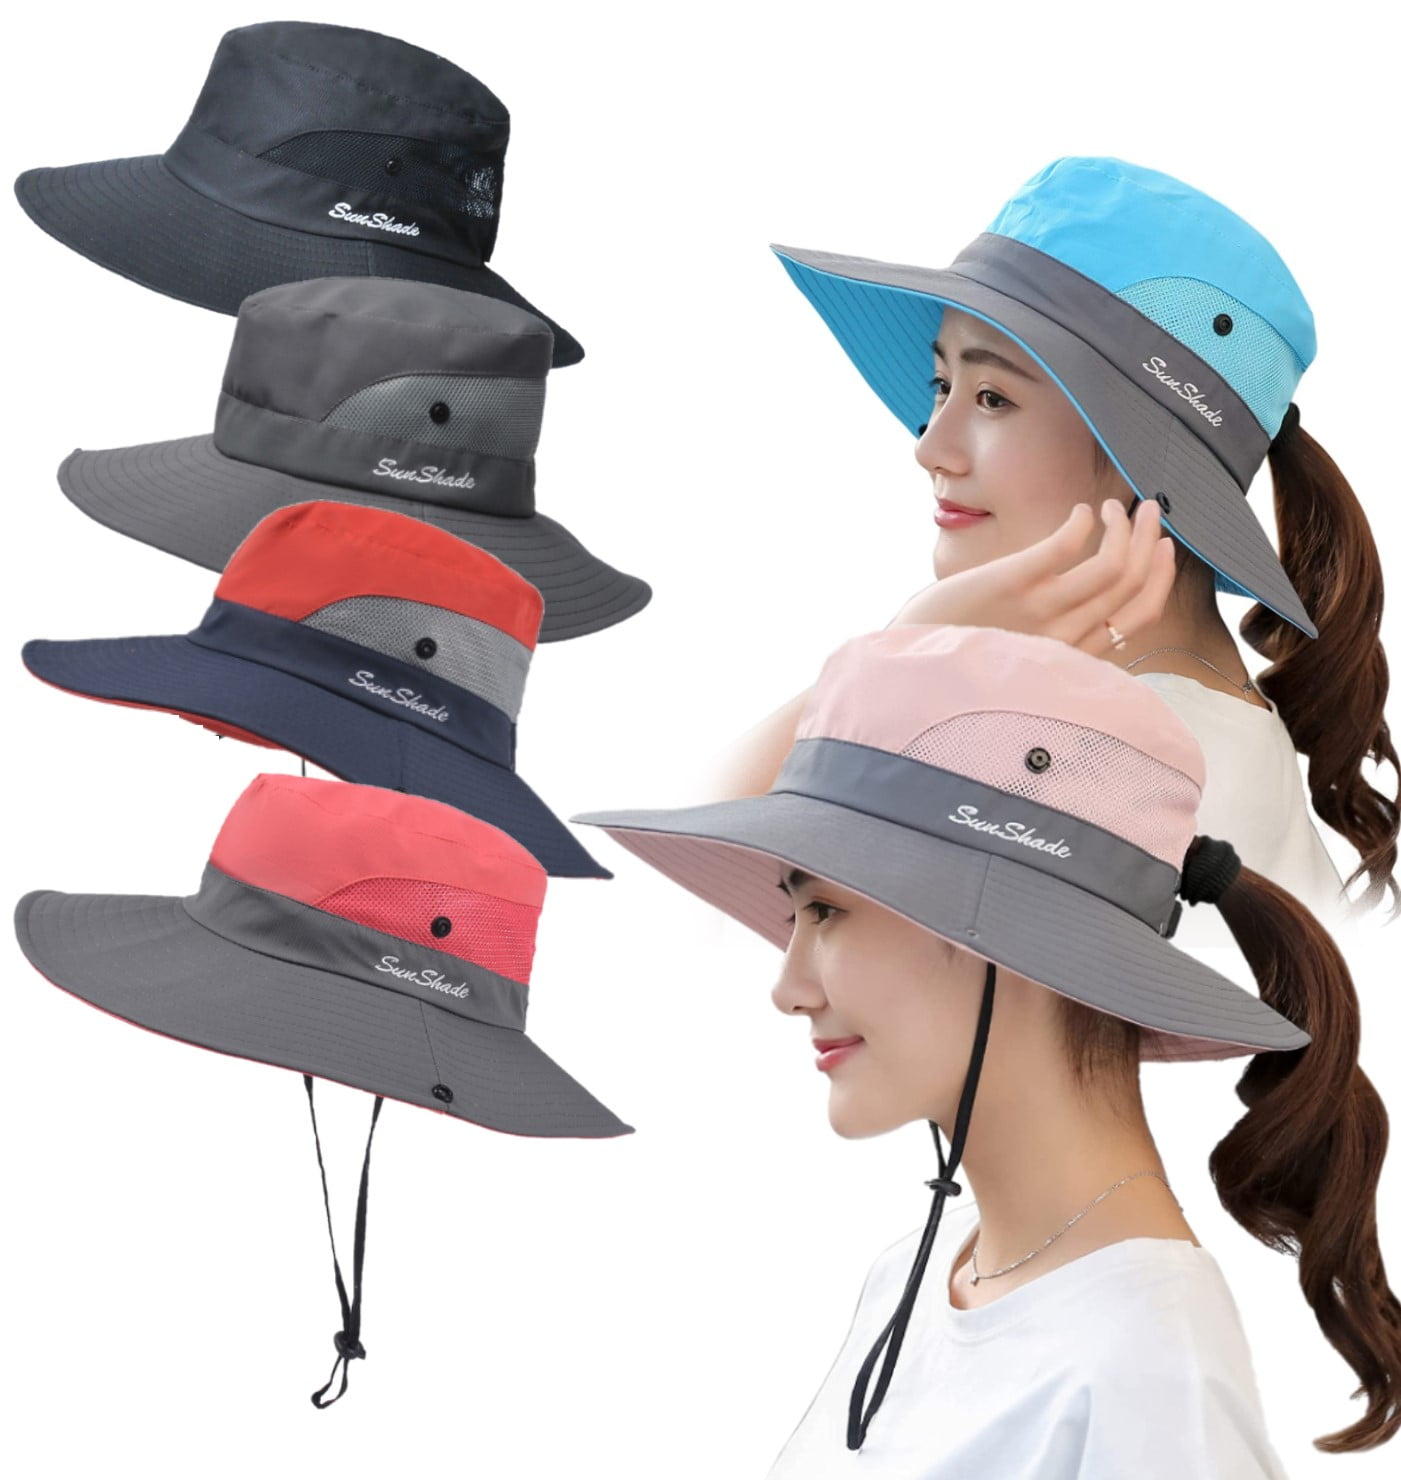 Womens Ponytail Sun Hat UV Protection Packable Wide Brim Beach Boonie Cap for Fishing Hiking 